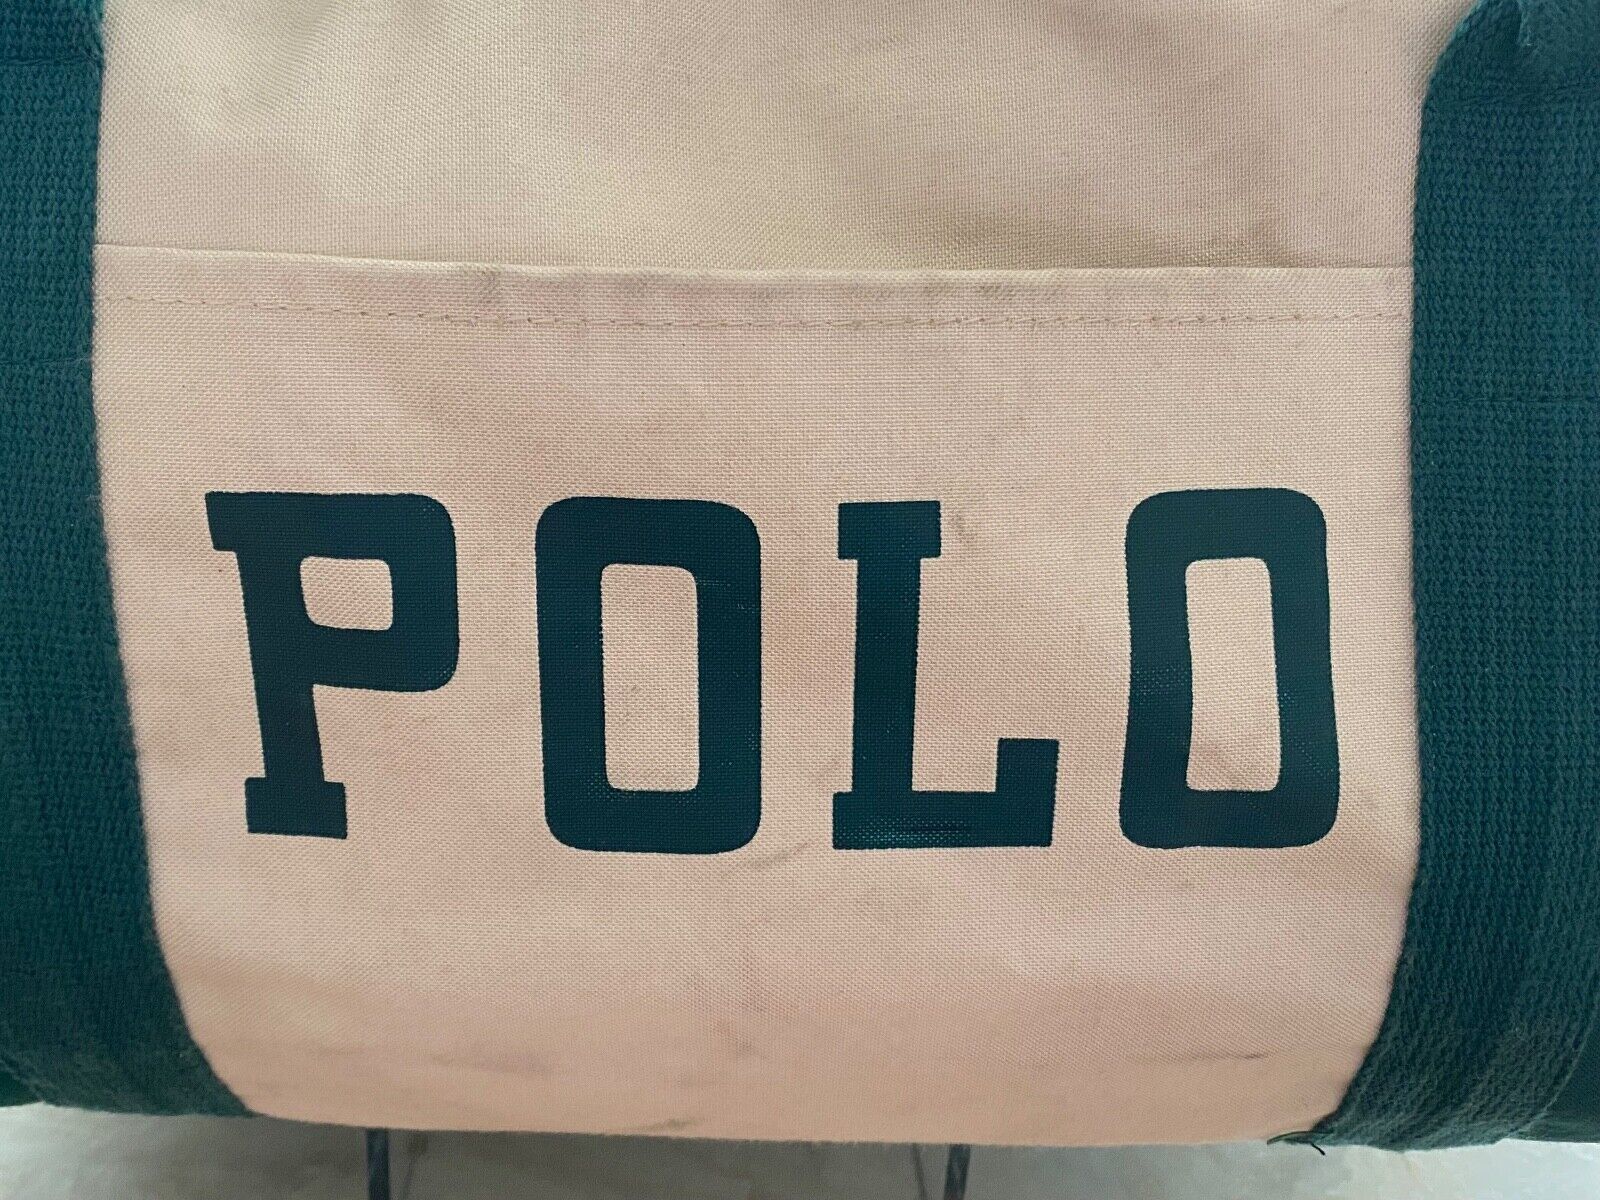 Vintage Ralph Lauren SPELLOUT POLO Green White Canvas Duffel Carry-on Gym Bag - $75.00